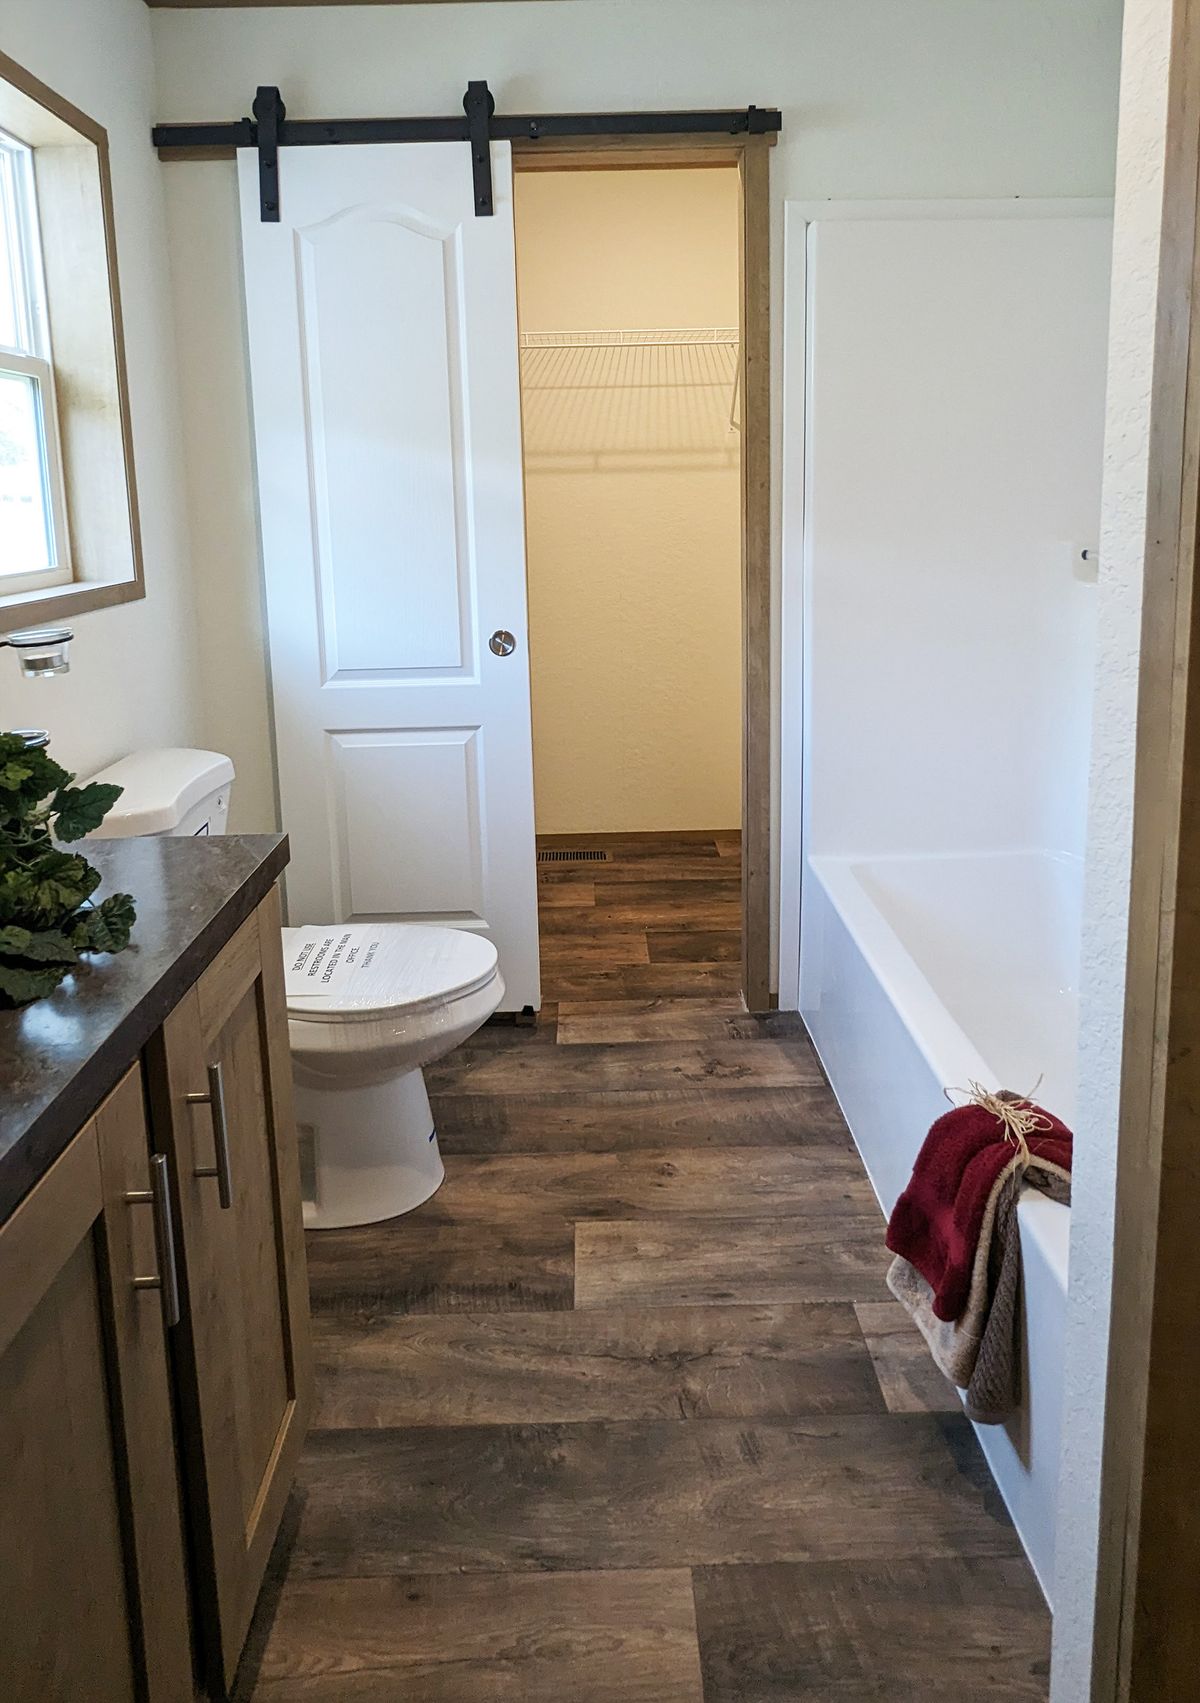 The LIFESTYLE 65-2 Primary Bathroom. This Manufactured Mobile Home features 3 bedrooms and 2 baths.